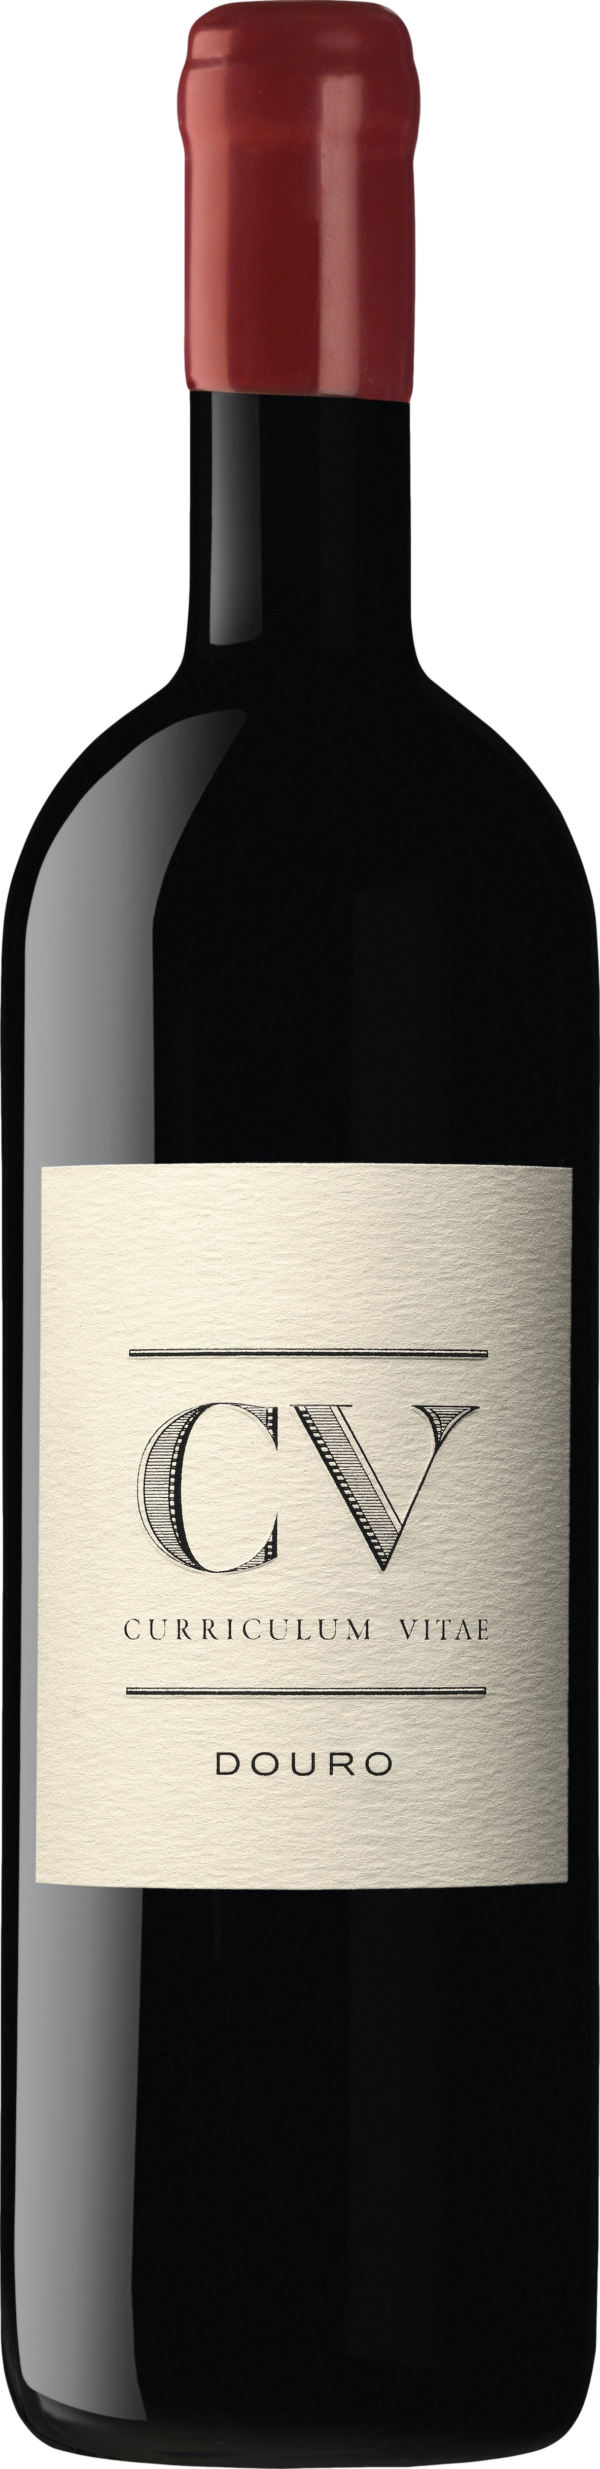 Product image of Quinta Vale D. Maria CV Curriculum Vitae 2019 from 8wines